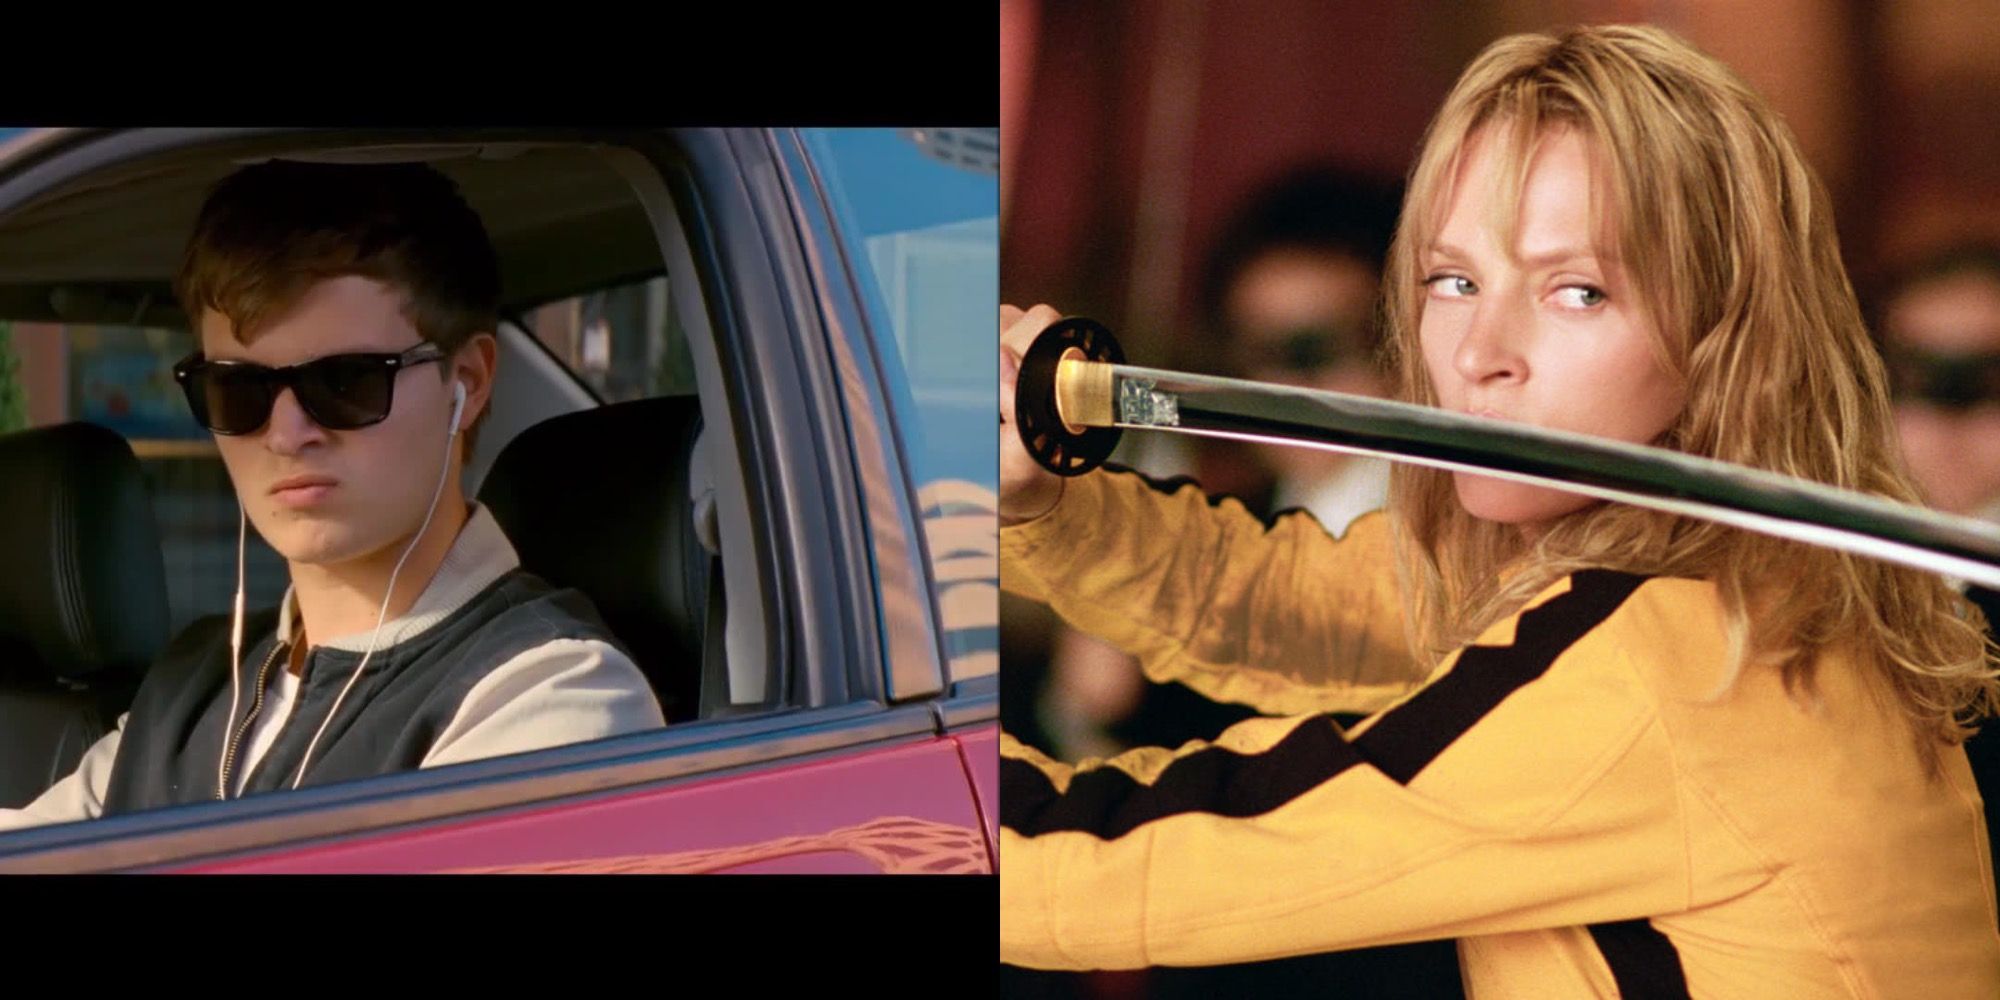 Split image of Uma Thurman and Ansel Elgort in their respective films Kill Bill and Baby Driver